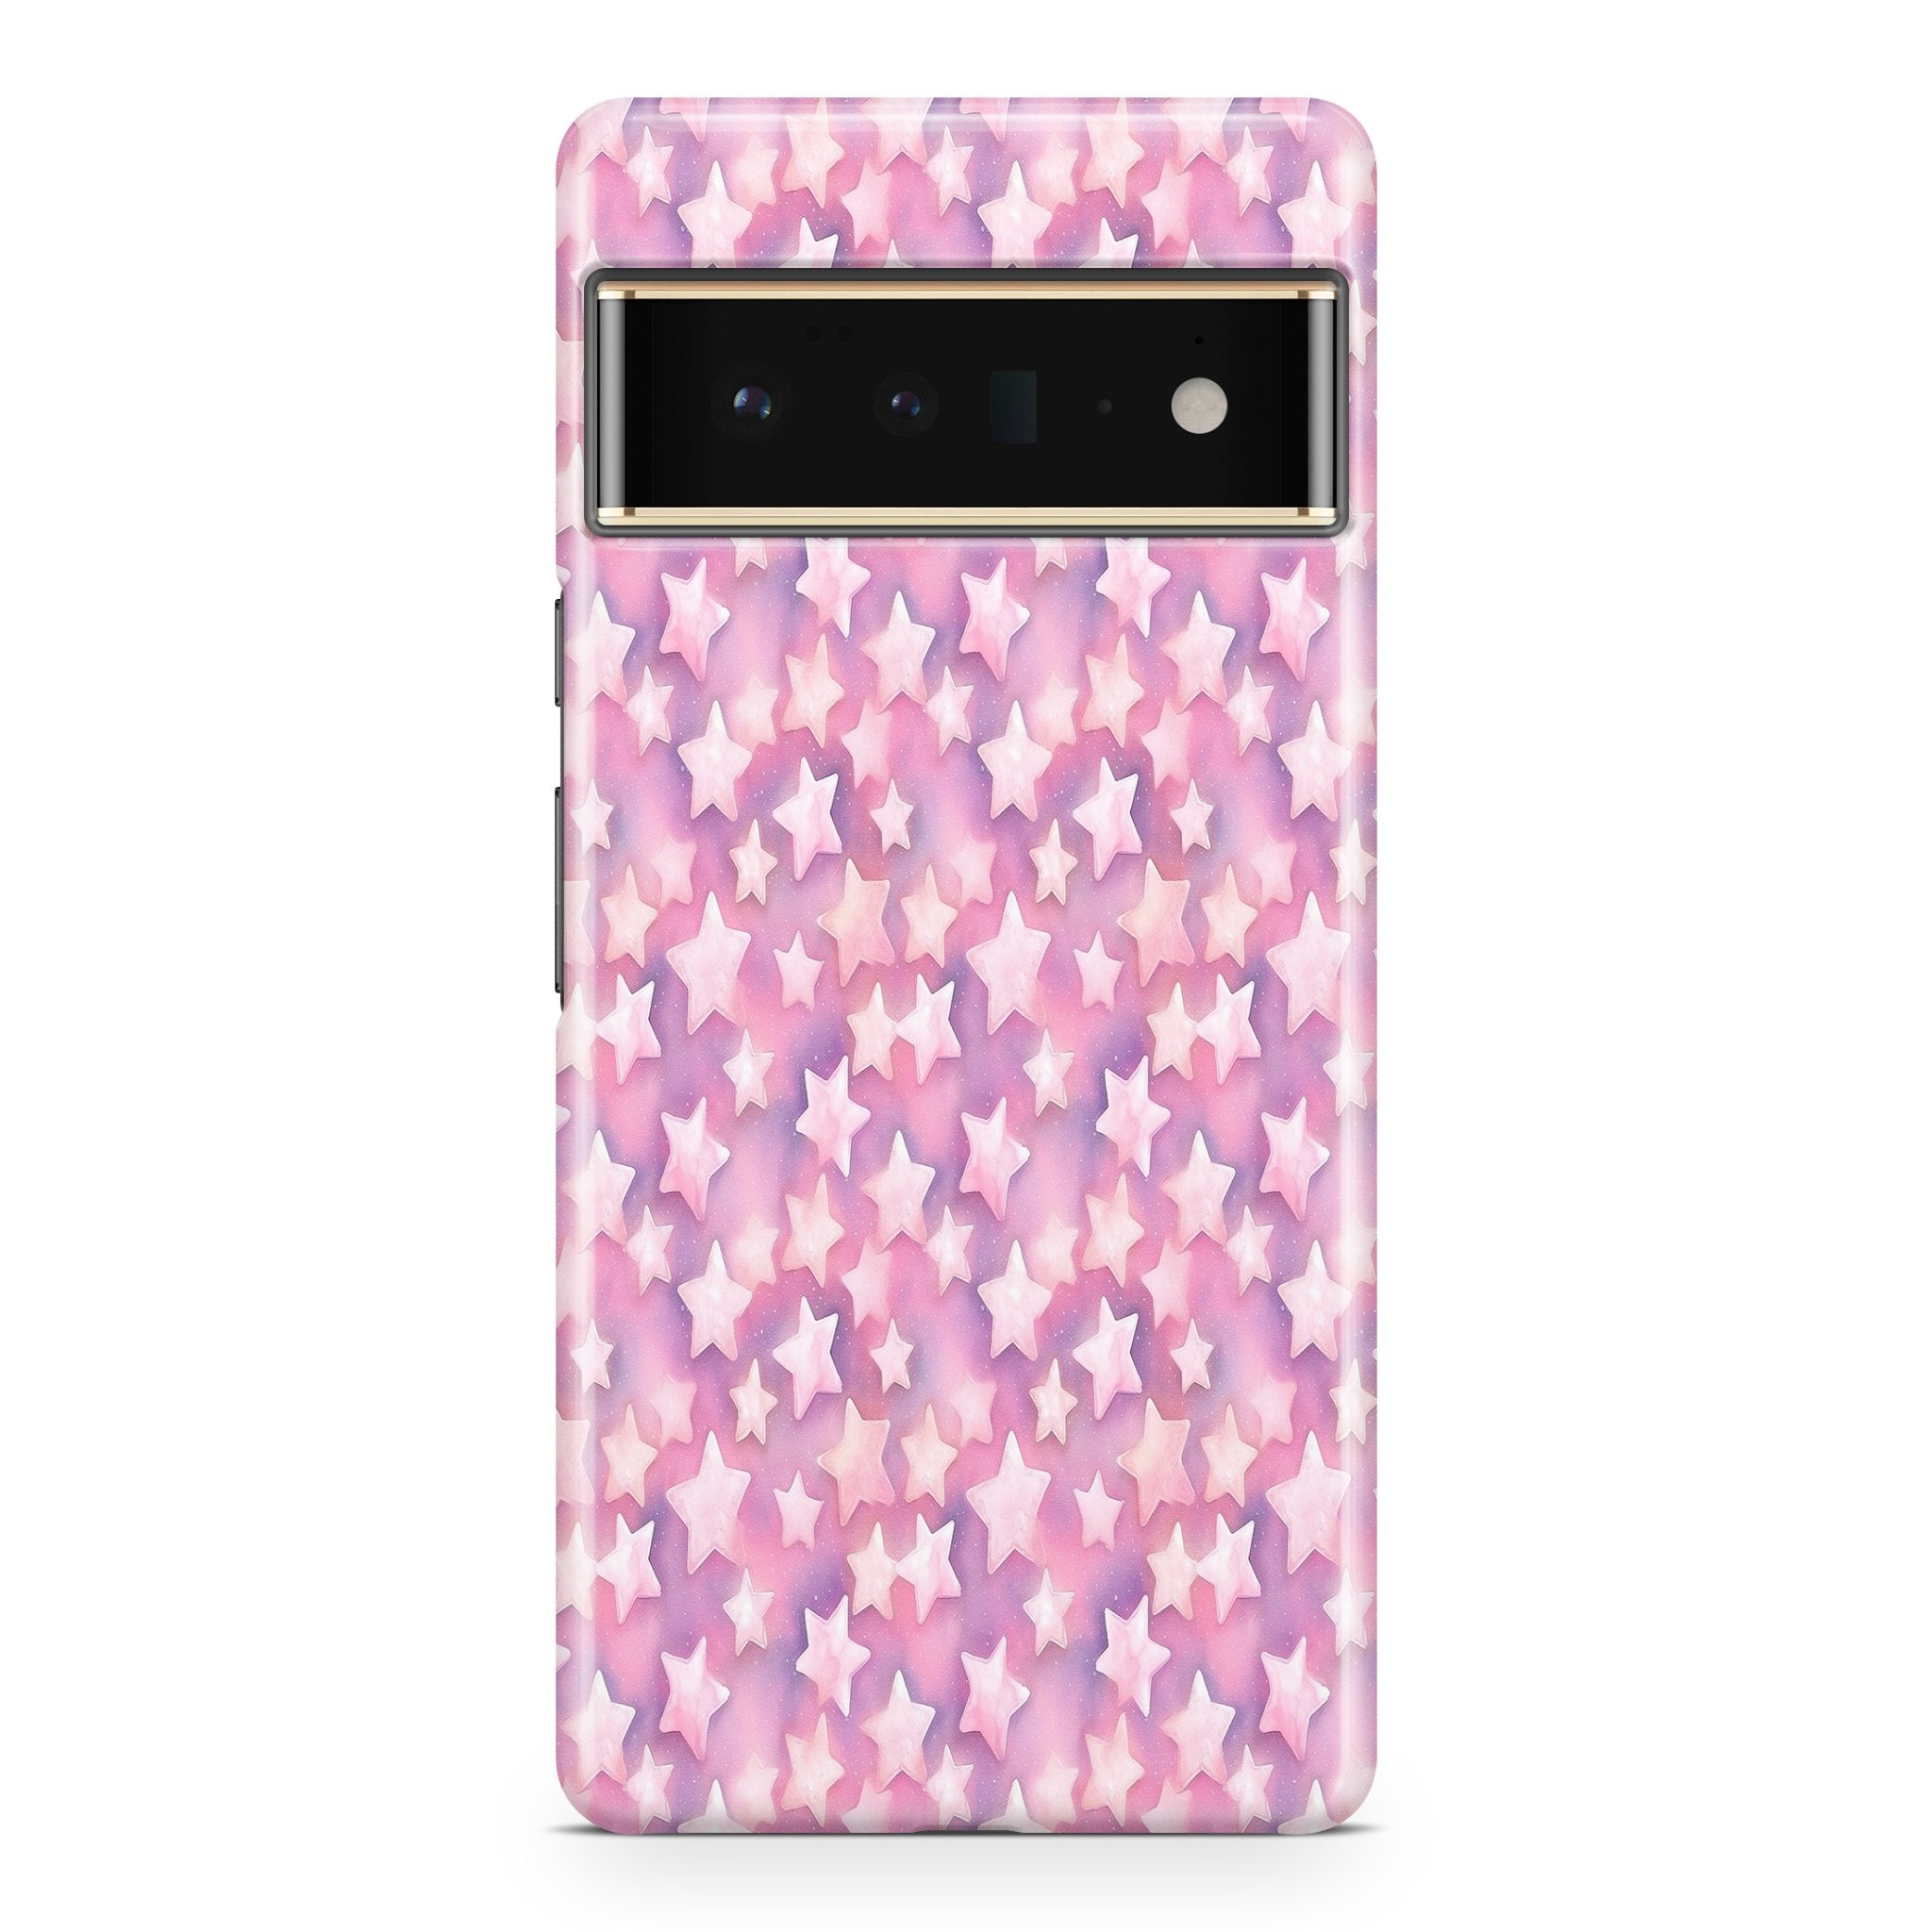 Dreamer Pink - Google phone case designs by CaseSwagger